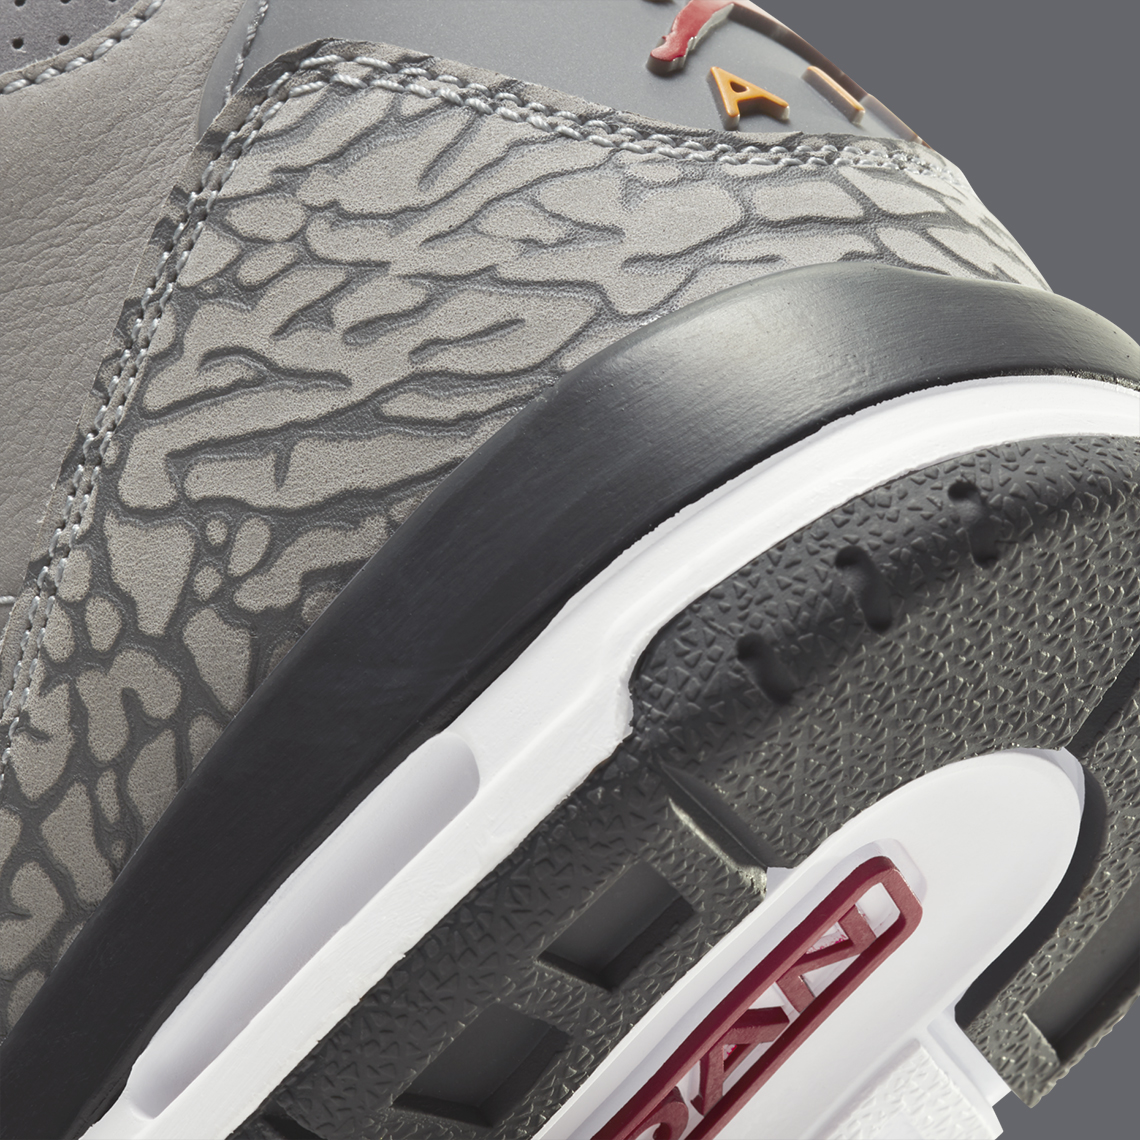 Releasing at jordan xxxiv doors is the Retro Gs Cool Grey 398614 012 Official Images 1